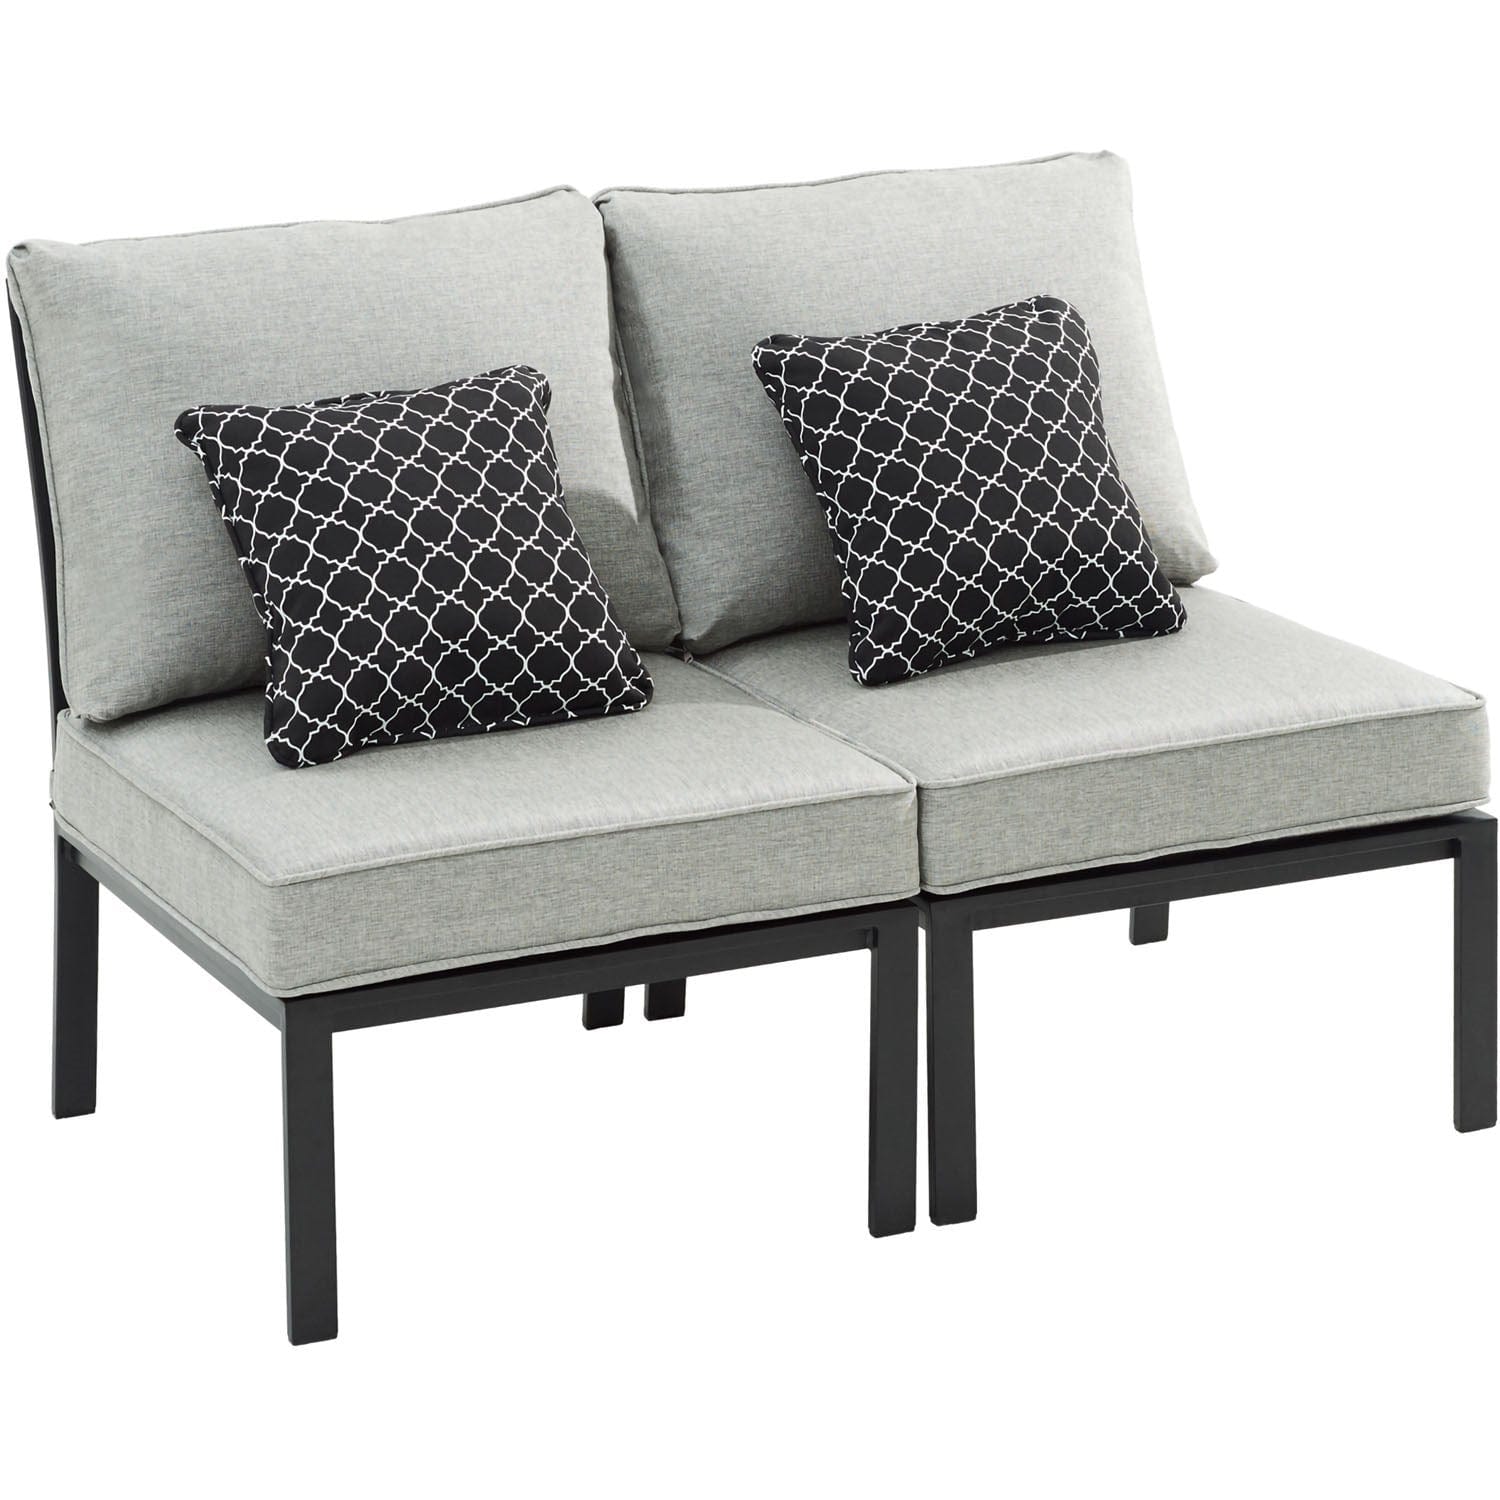 Hanover Outdoor Sectional Hanover - Murano 6pc Sectional: Right Corner, Left Corner, 2 Chairs, 2 Tables